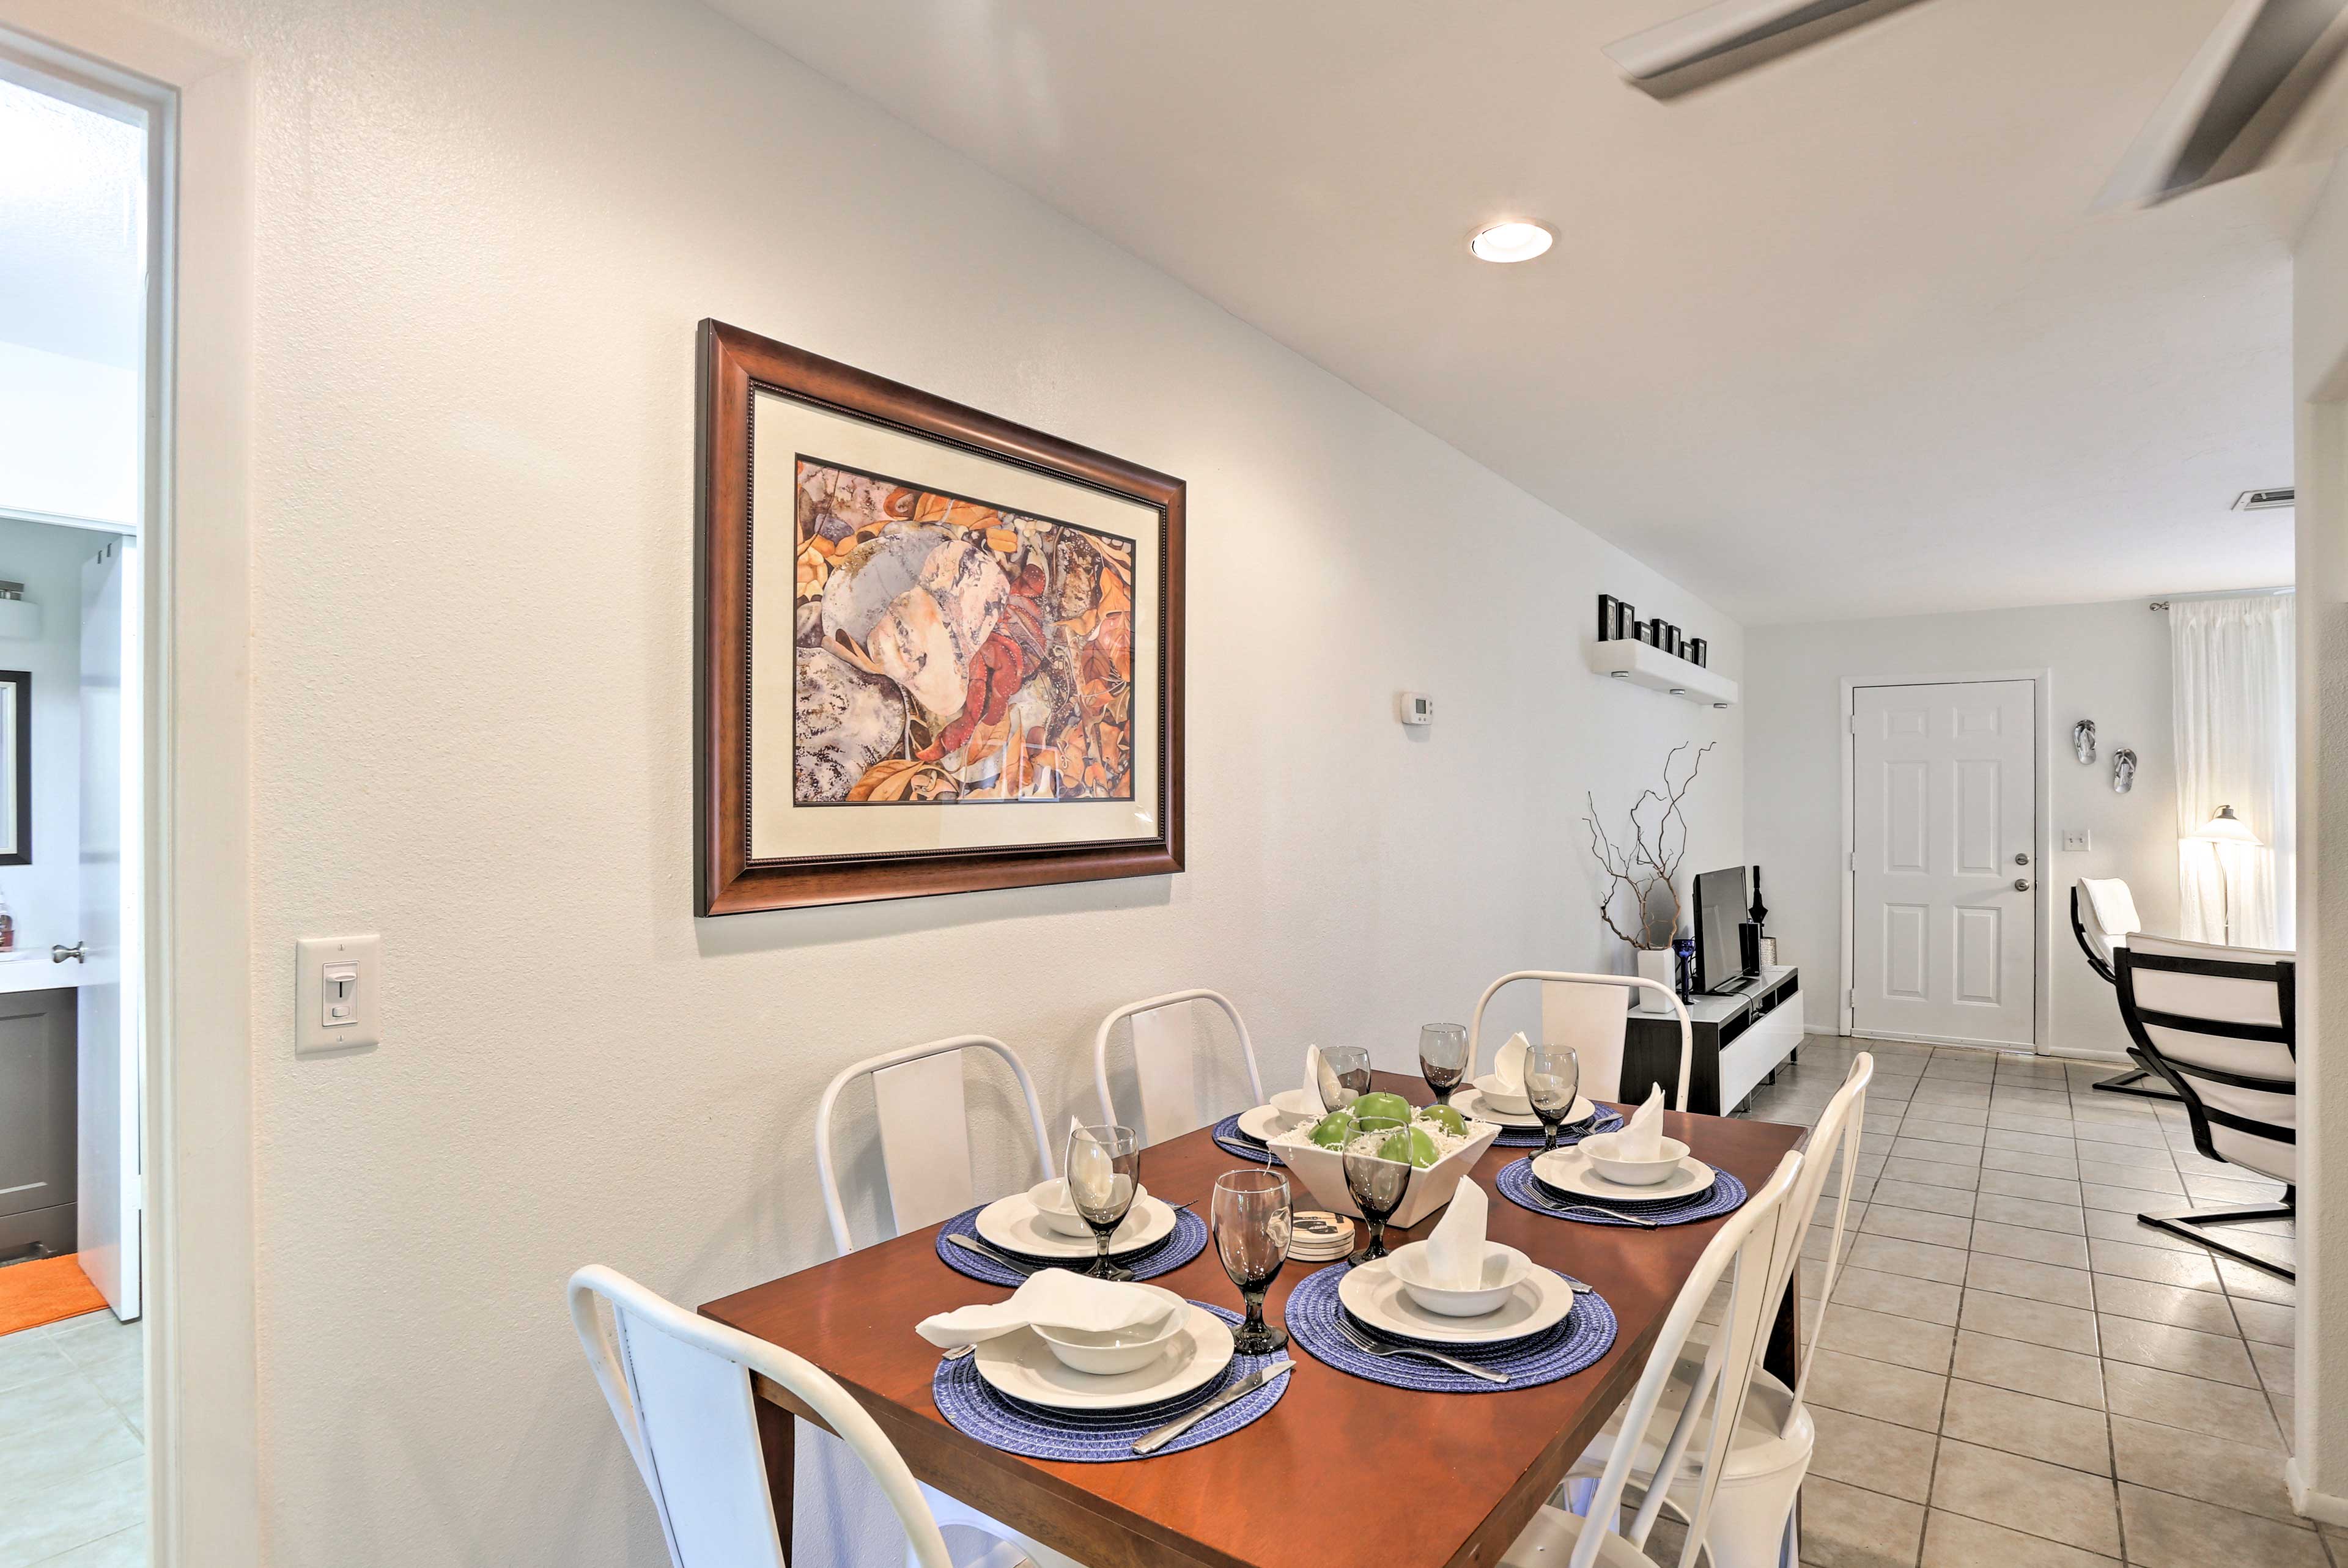 The dining table is situated in between the living area & kitchen.